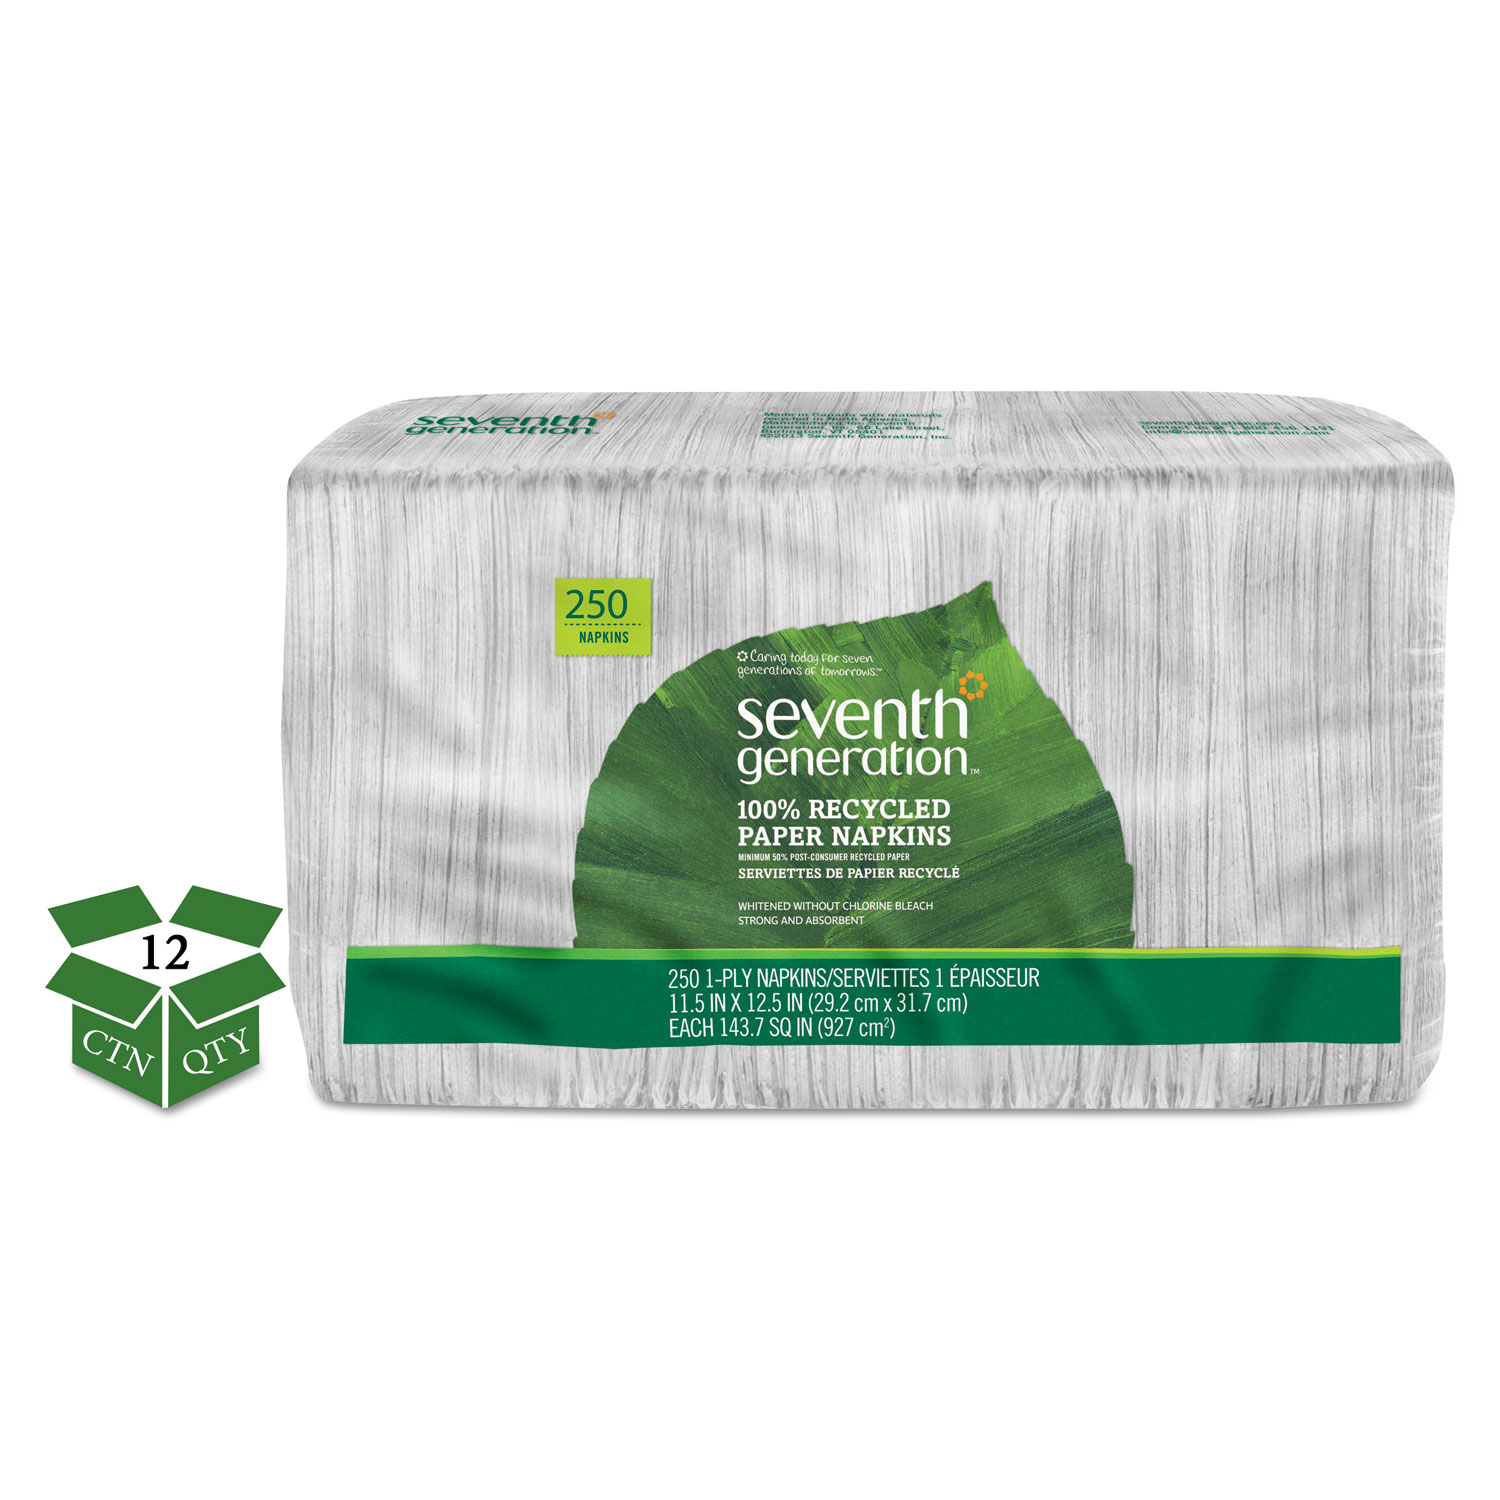  Seventh Generation SEV 13713 100% Recycled Napkins, 1-Ply, 11 1/2 x 12 1/2, White, 250/Pack, 12 Packs/Carton (SEV13713CT) 